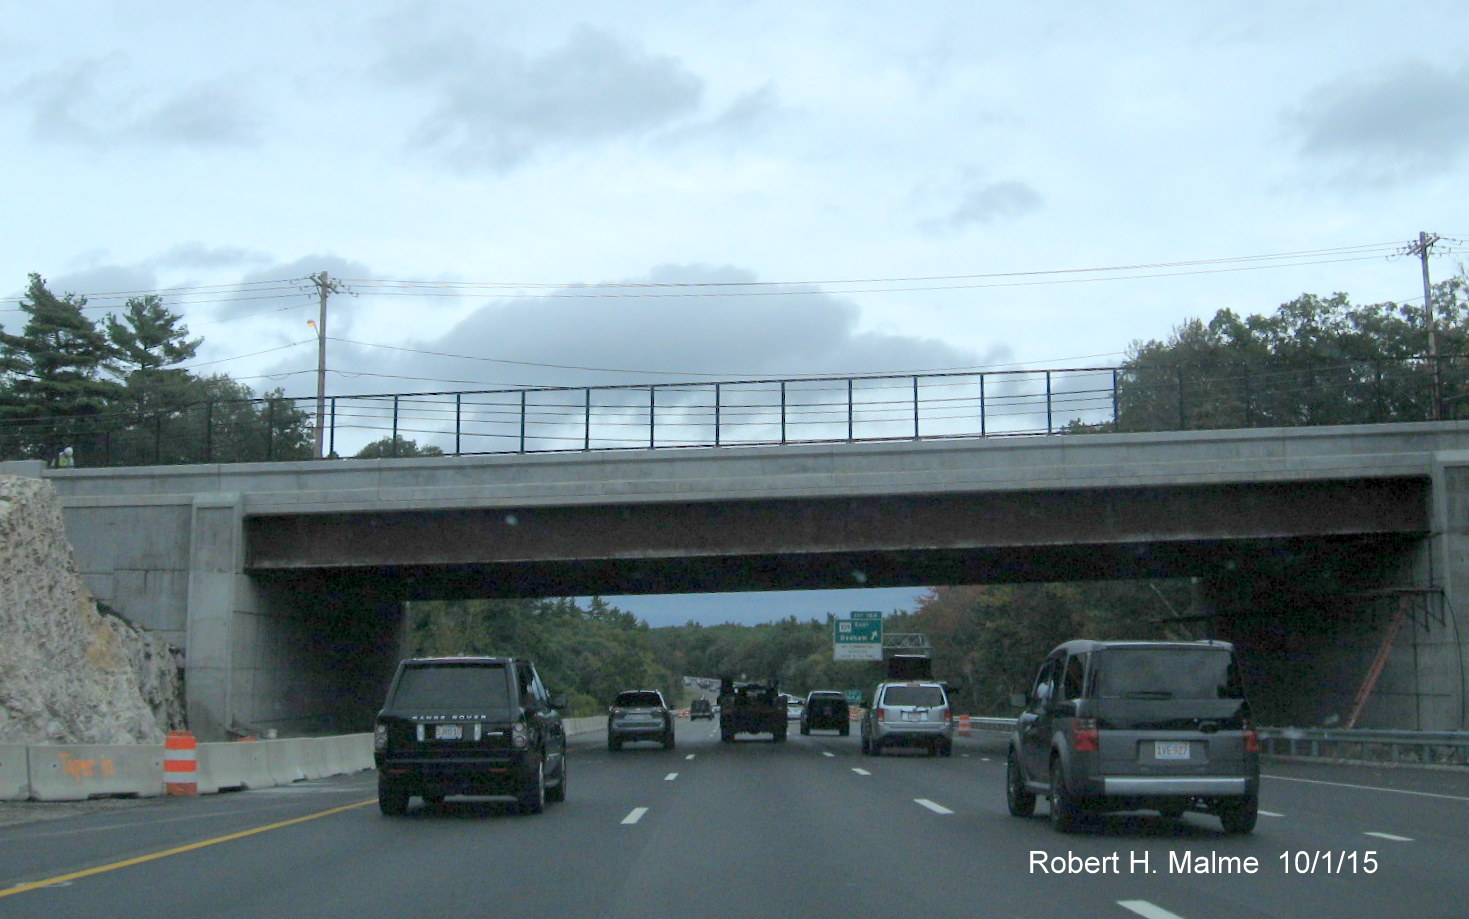 Image of nearly complete MA 109 bridge over I-95 South in Dedham